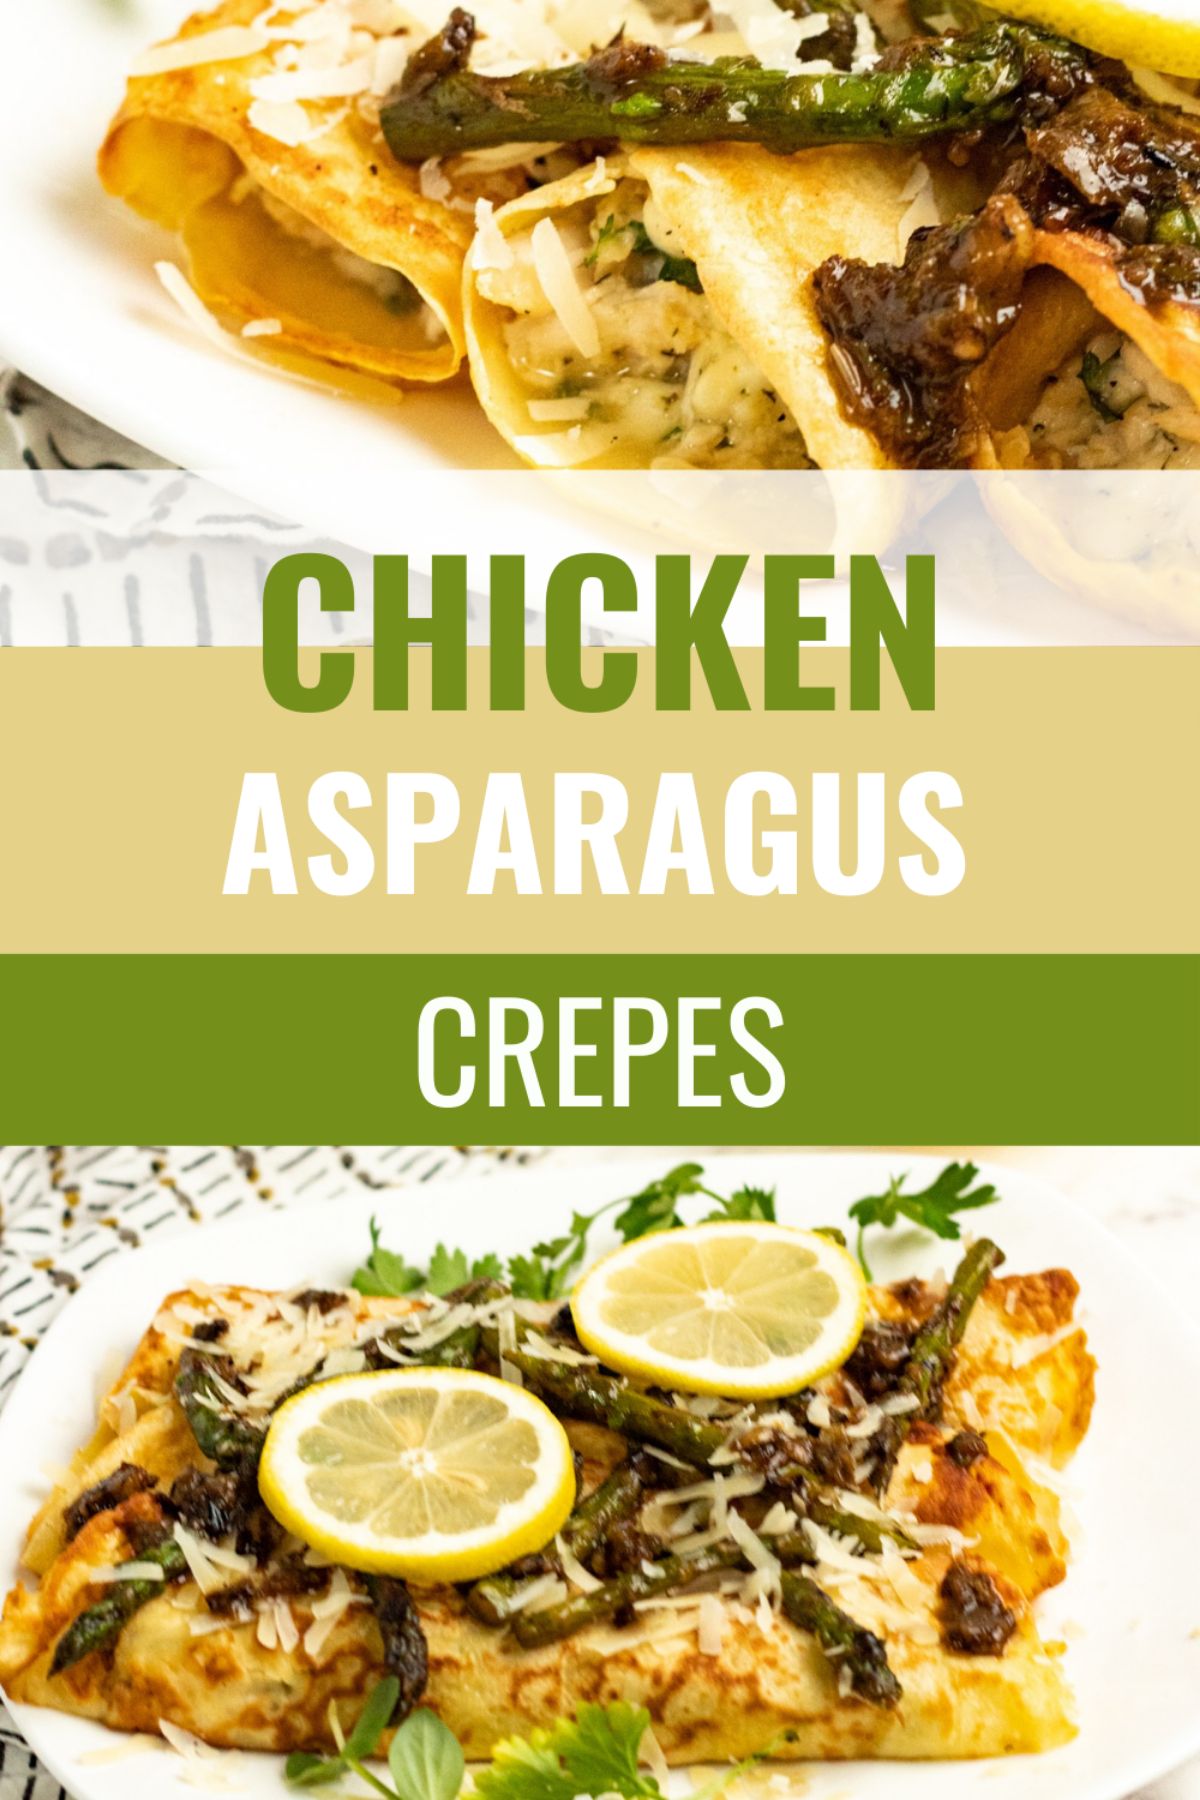 These Chicken Asparagus Crepes are light, fluffy, and perfectly filling. They make the perfect breakfast or brunch dish! #chickenasparaguscrepes #chicken #asparaguscrepes #crepesrecipe via @wondermomwannab